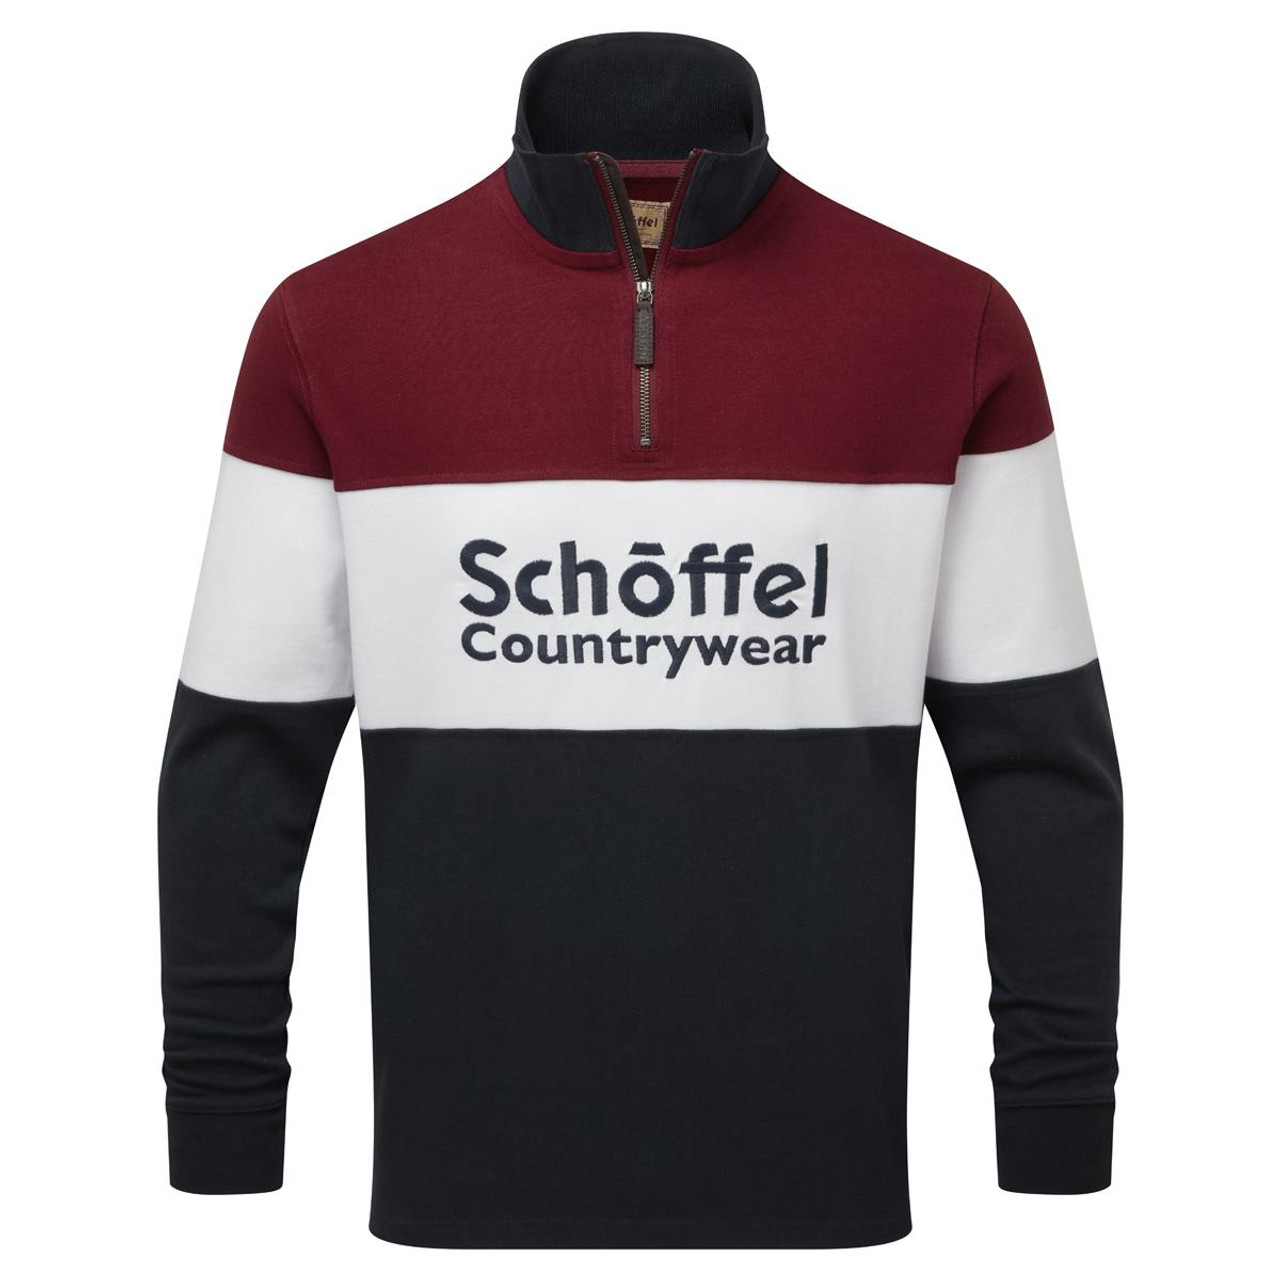 What is the material of the Schoffel Exeter jumper?